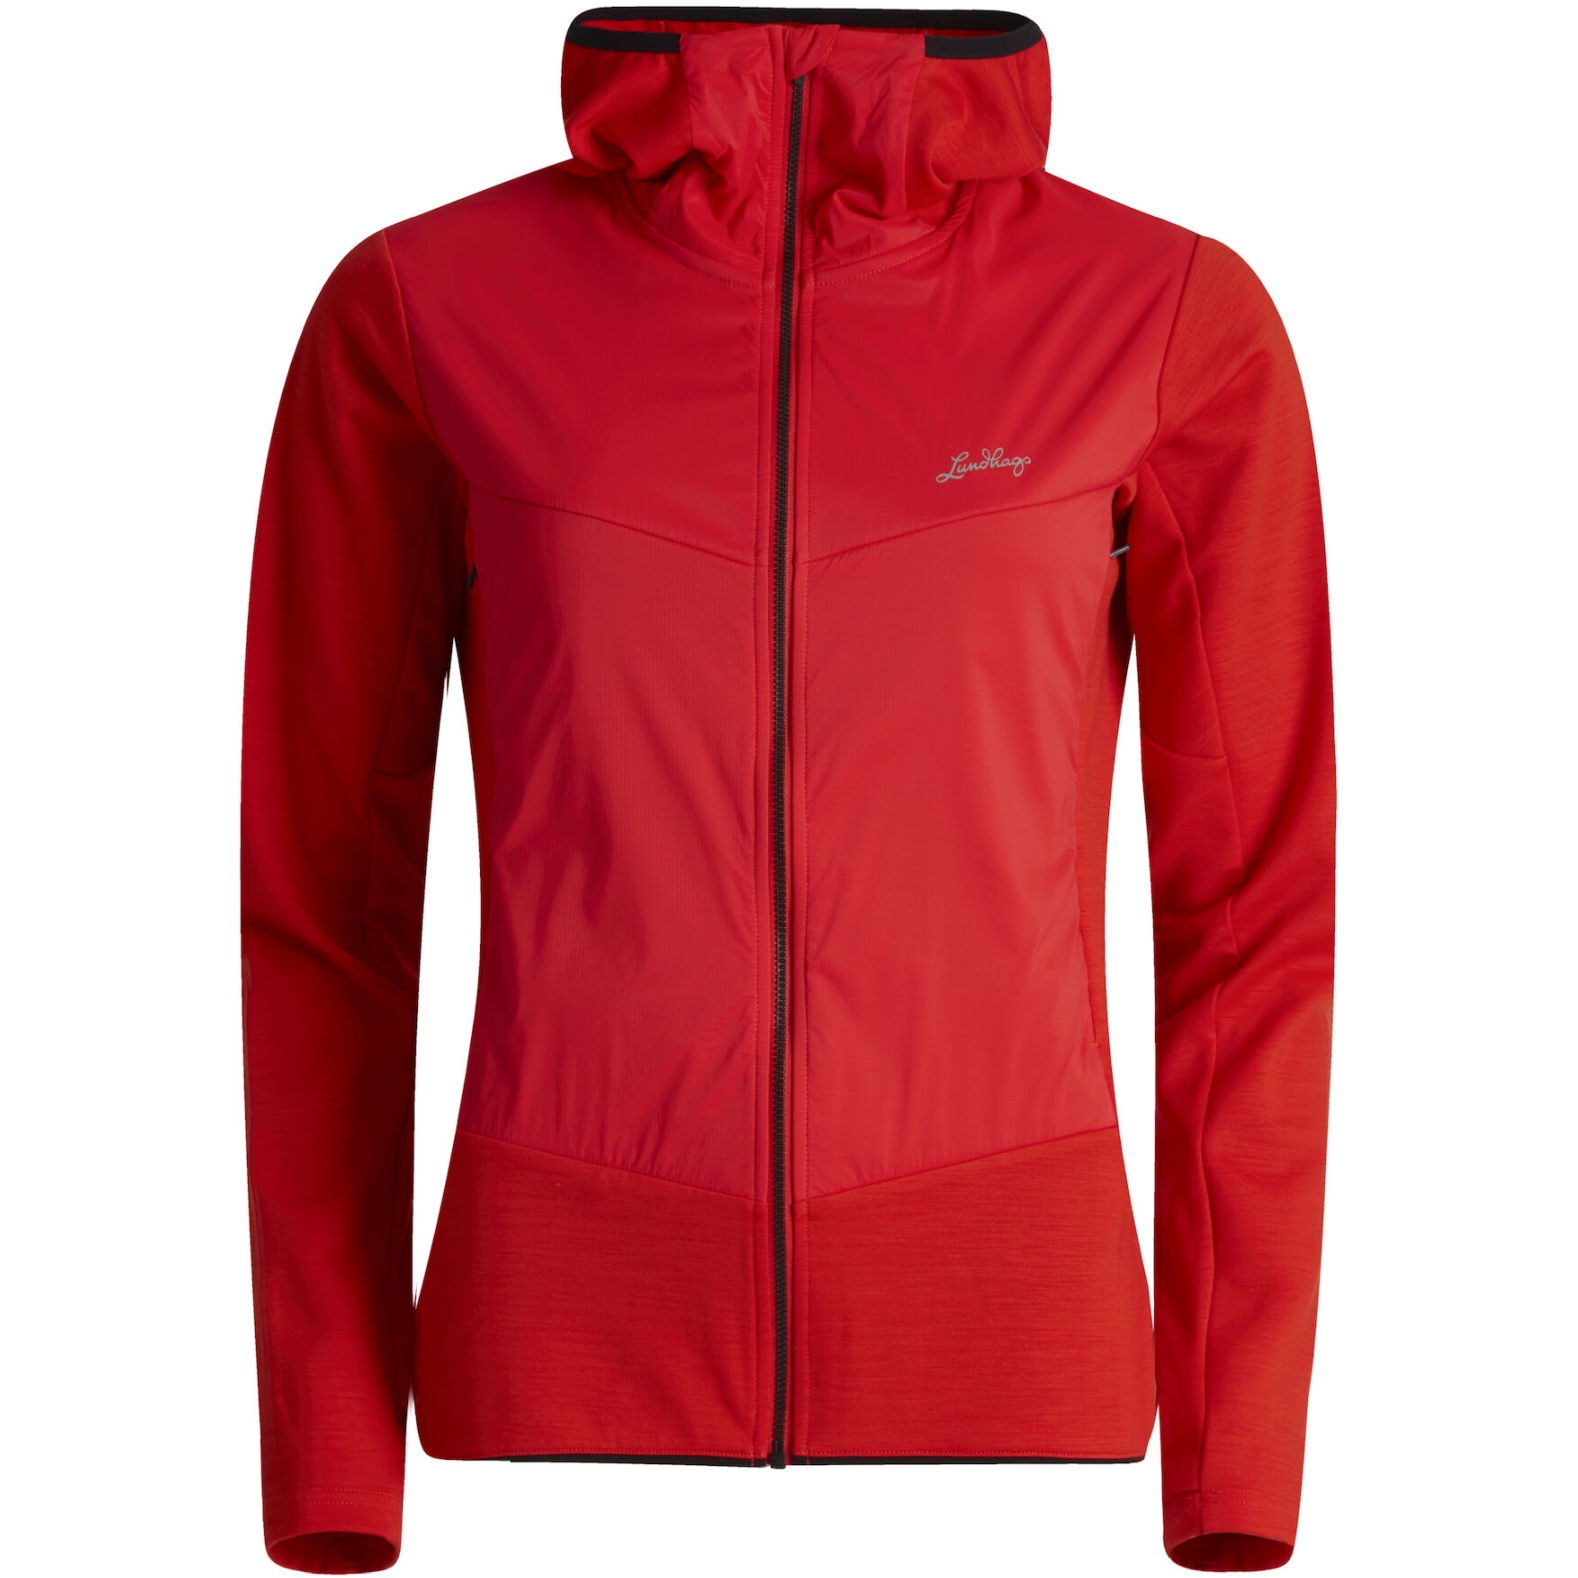 Picture of Lundhags Padje Merino Block Hoodie Jacket Women - Lively Red 250